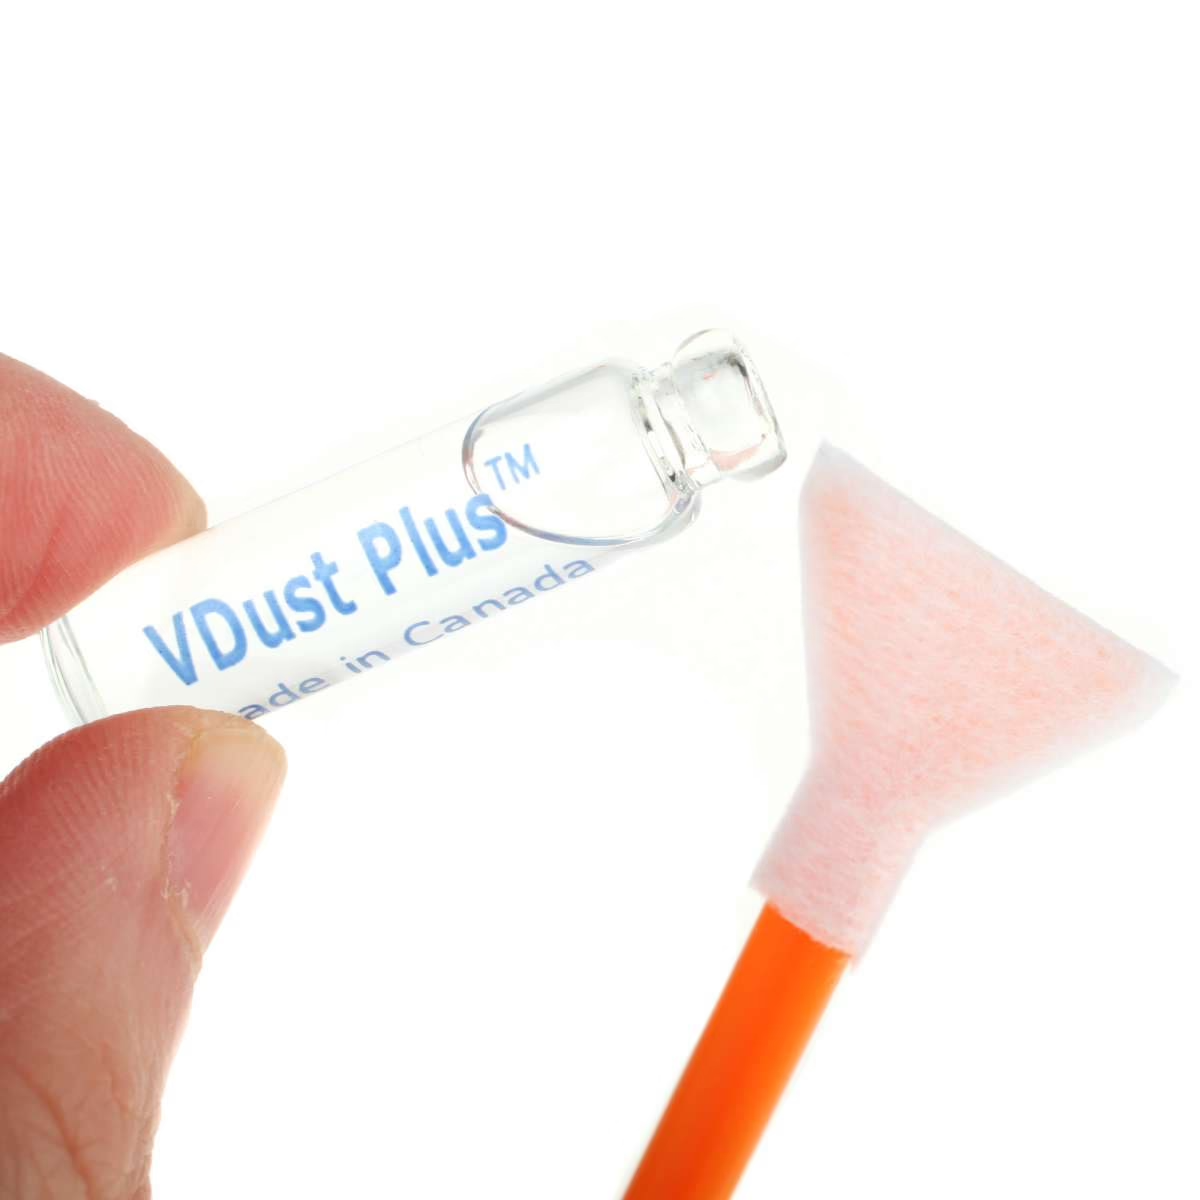 VisibleDust Thinlite-X Light Cleaning 1.3x 20mm